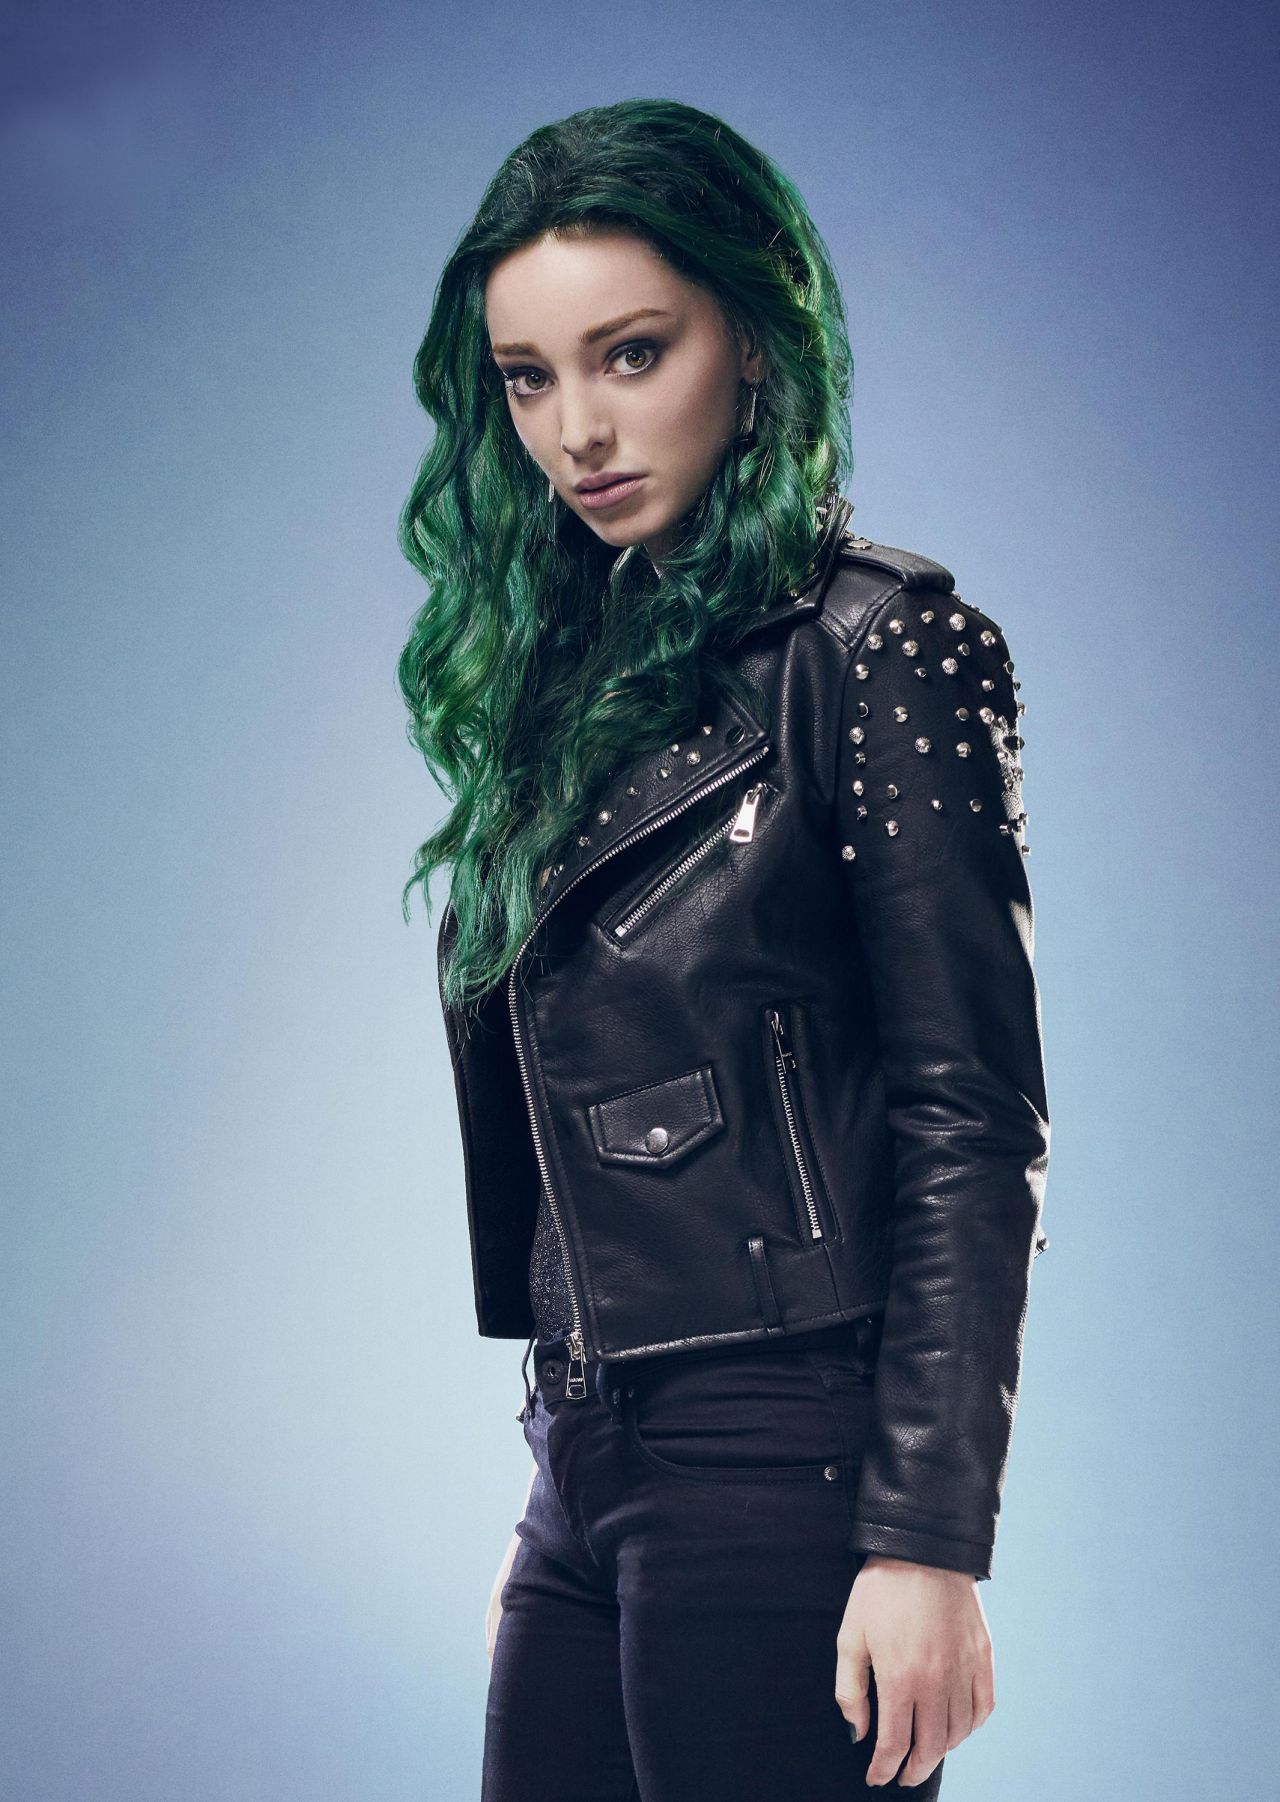 Emma Dumont The Gifted TV Show Actress Wallpapers